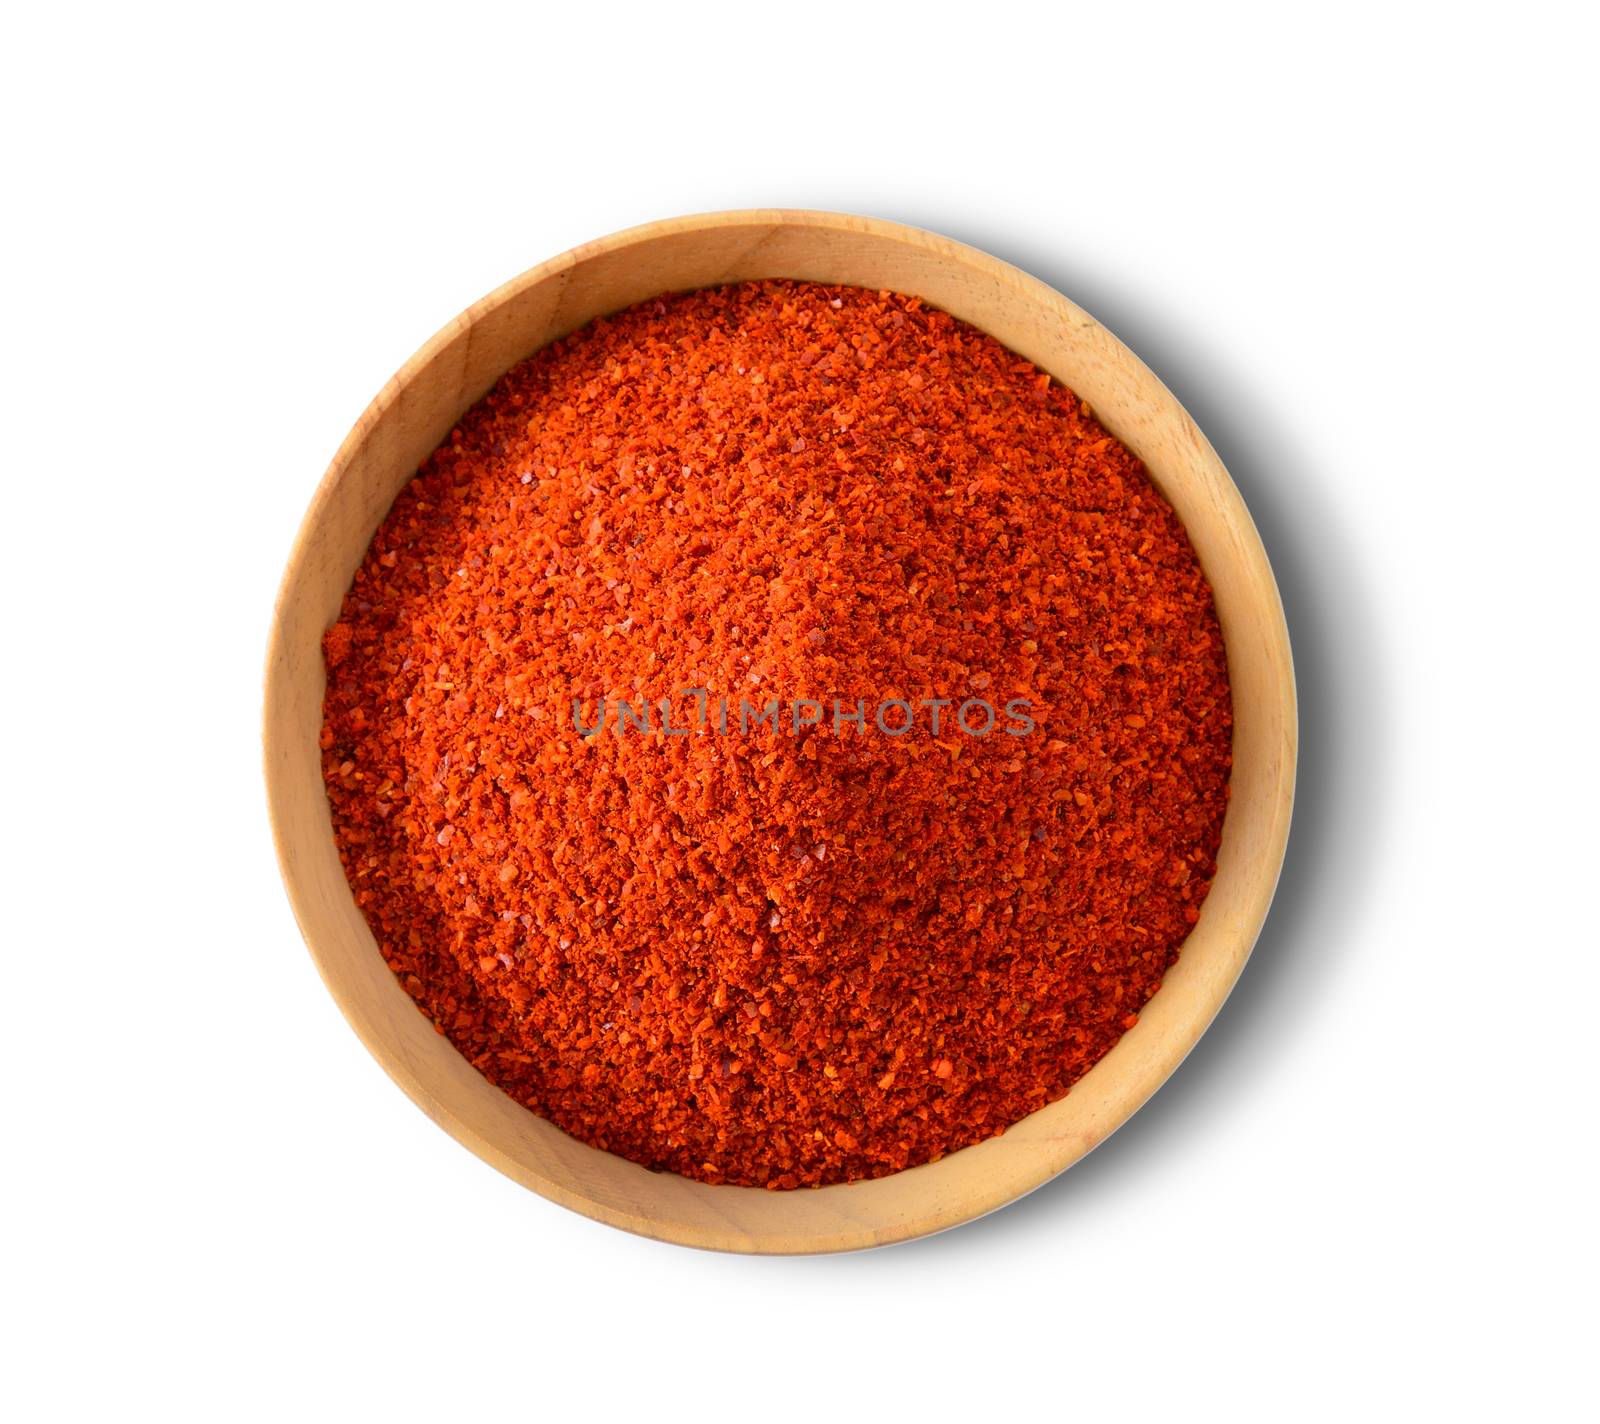 powder pepper in wood bowl on white background